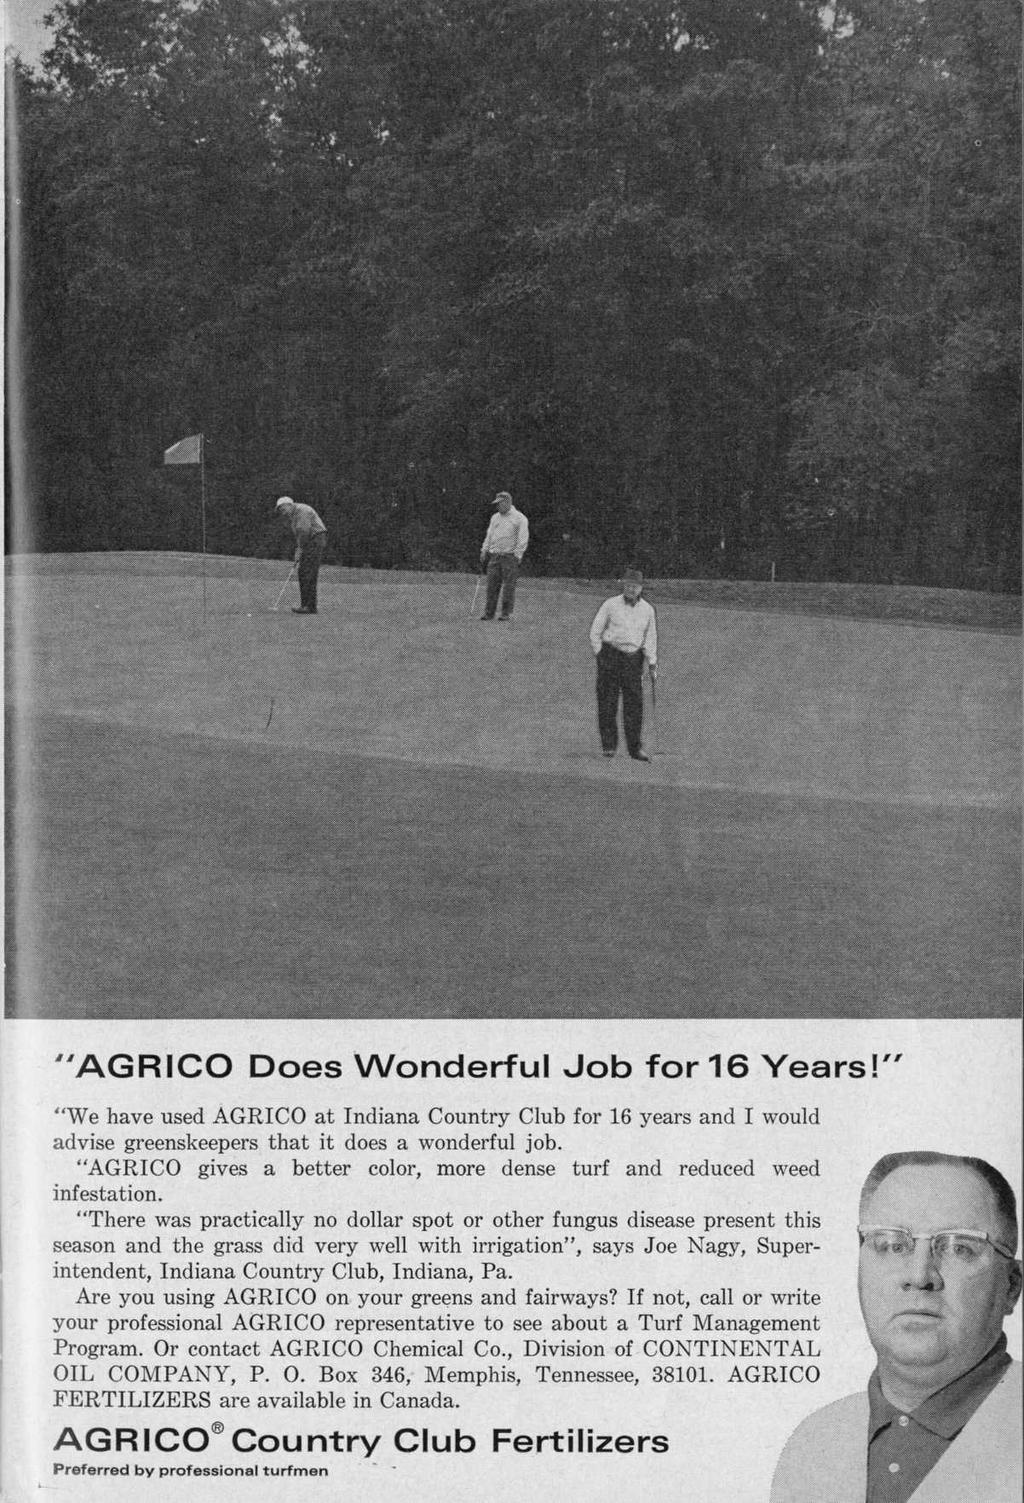 "AGRICO Does Wonderful Job for 16 Years!" "We have used AGRICO at Indiana Country Club for 16 years and I would advise greenskeepers that it does a wonderful job.